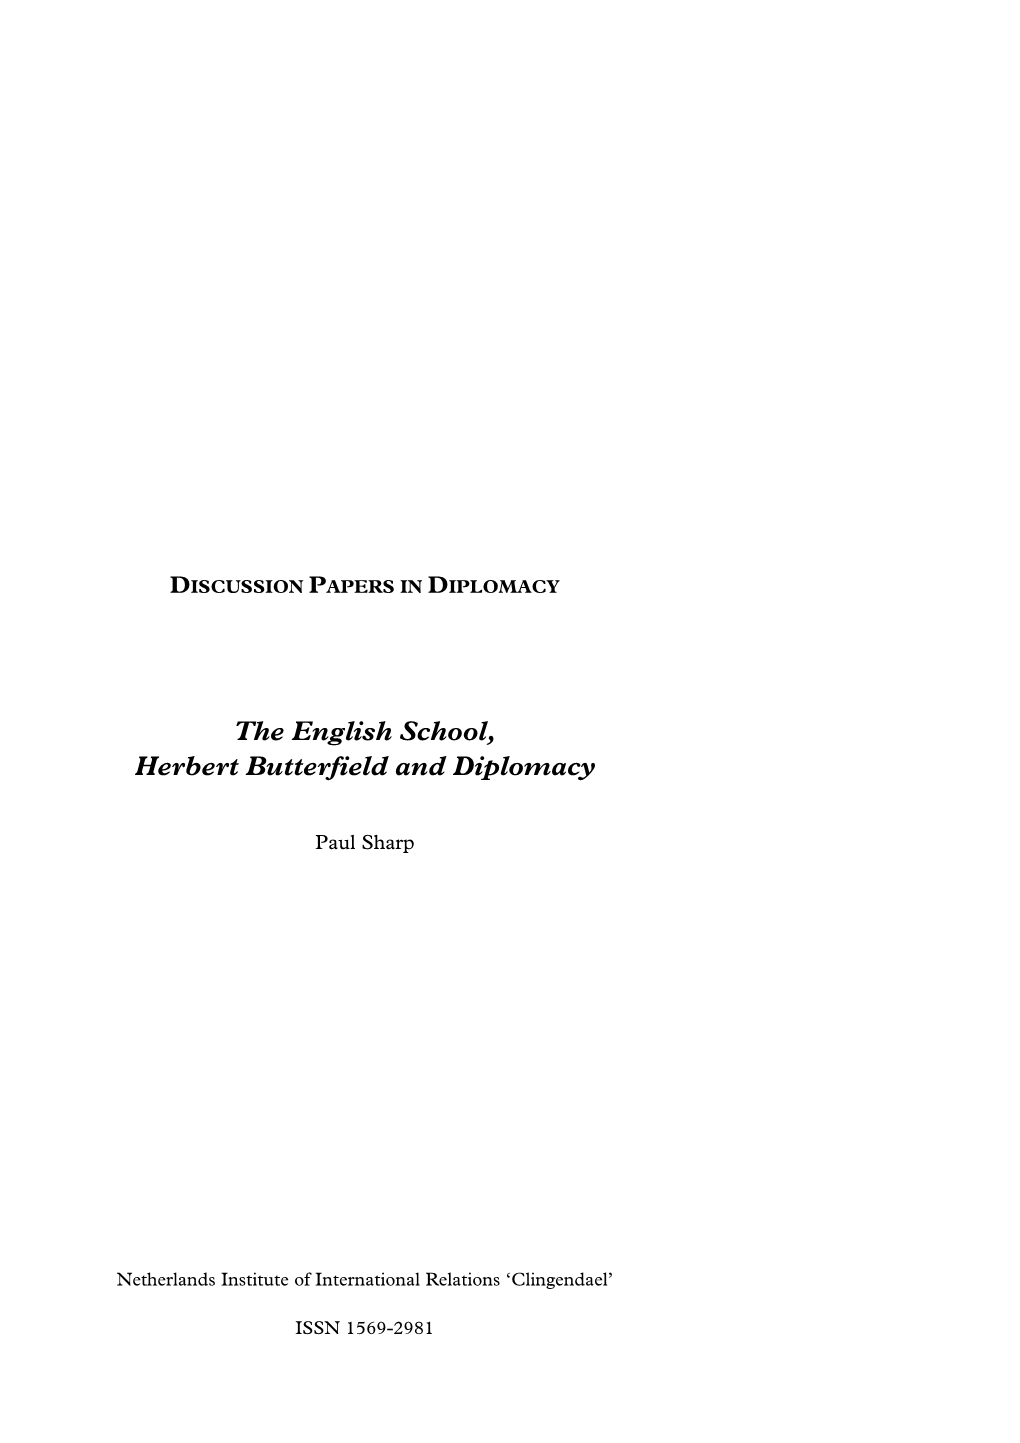 The English School, Herbert Butterfield and Diplomacy